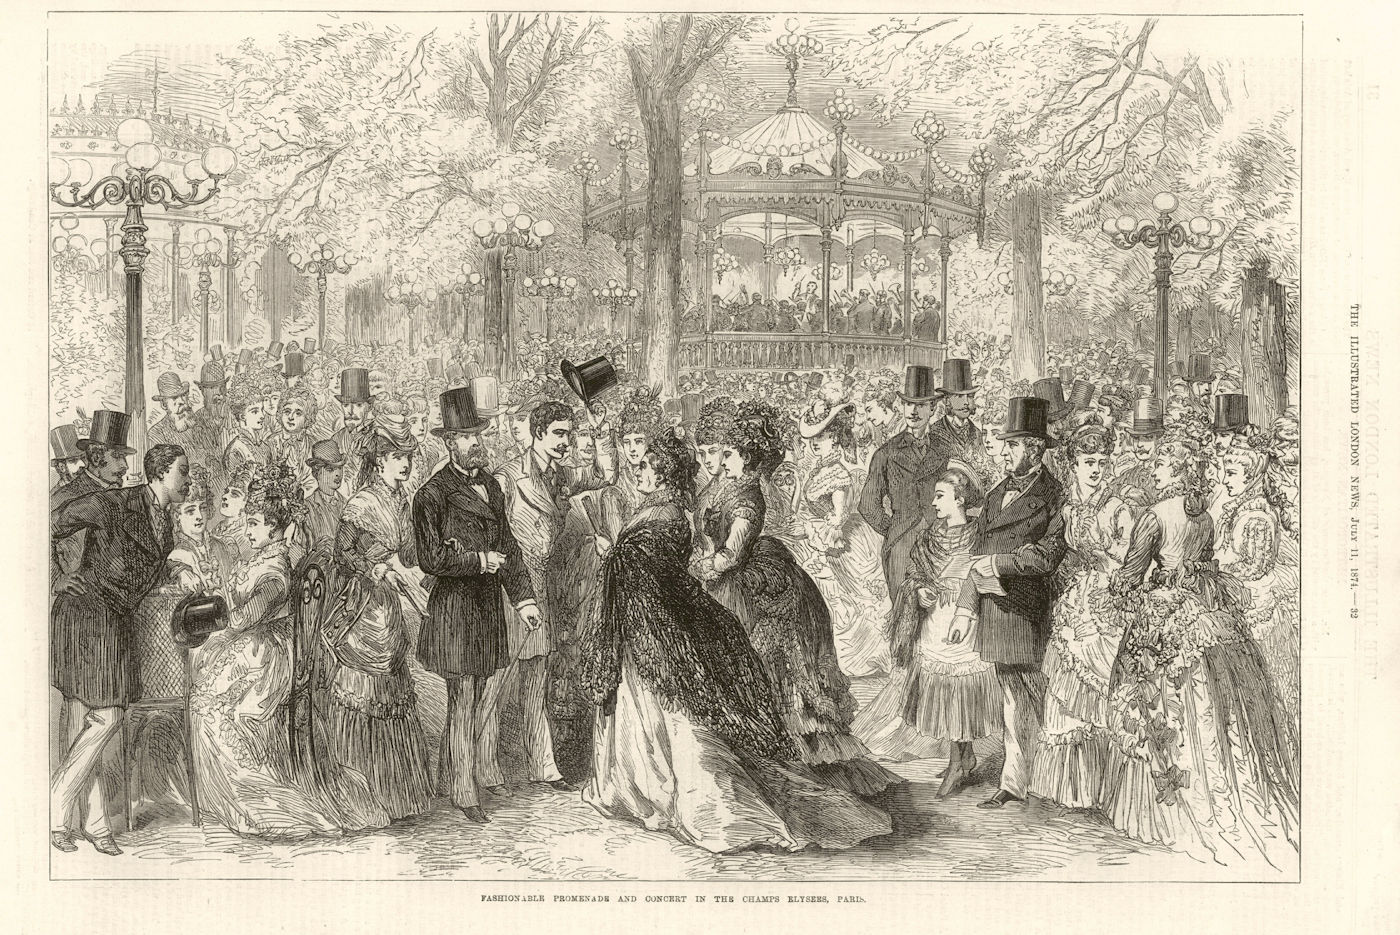 Fashionable promenade & concert in the Champs Elysees, Paris. Bandstand 1874